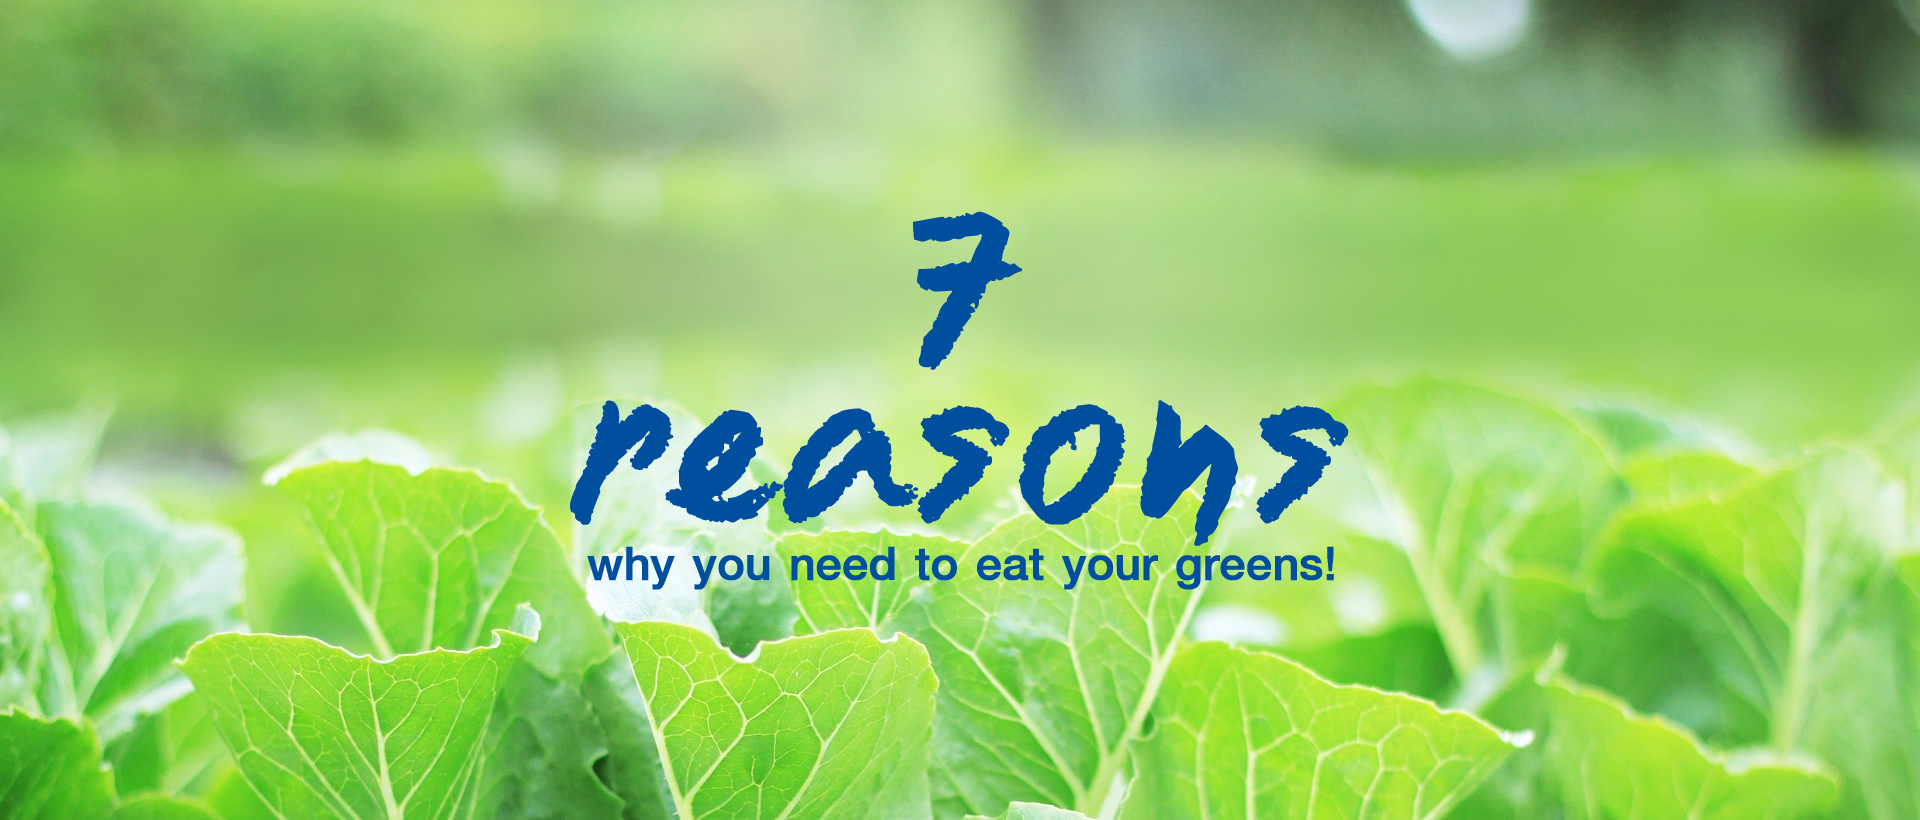 reasons why you need to eat your greens 